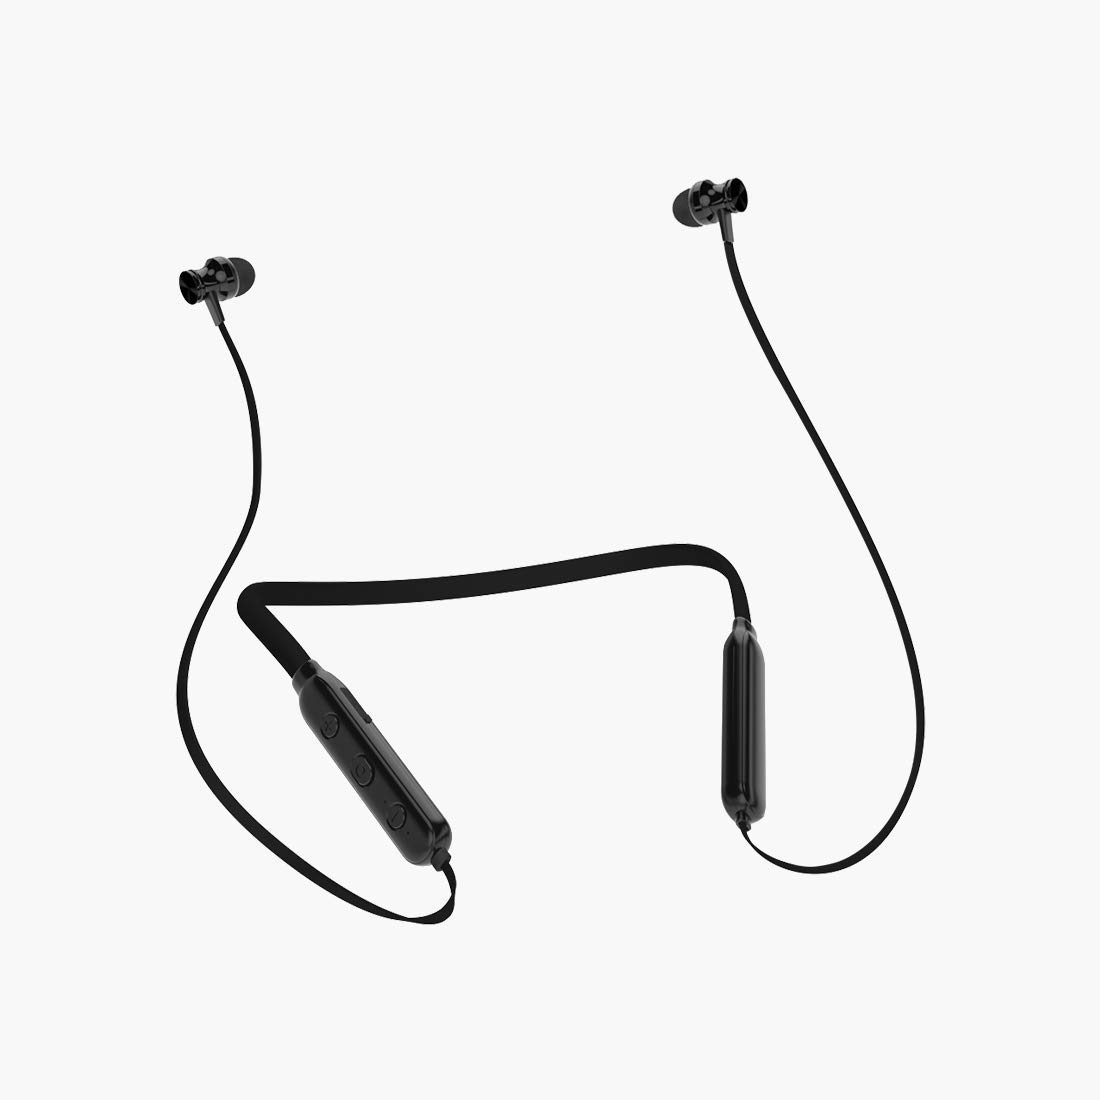 HEADSET BLUETOOTH BEHIND THE NECK RIVERSONG HIGH QUALITY STREAM N+  EA65 سماعه قوس ,Headphones & Mics